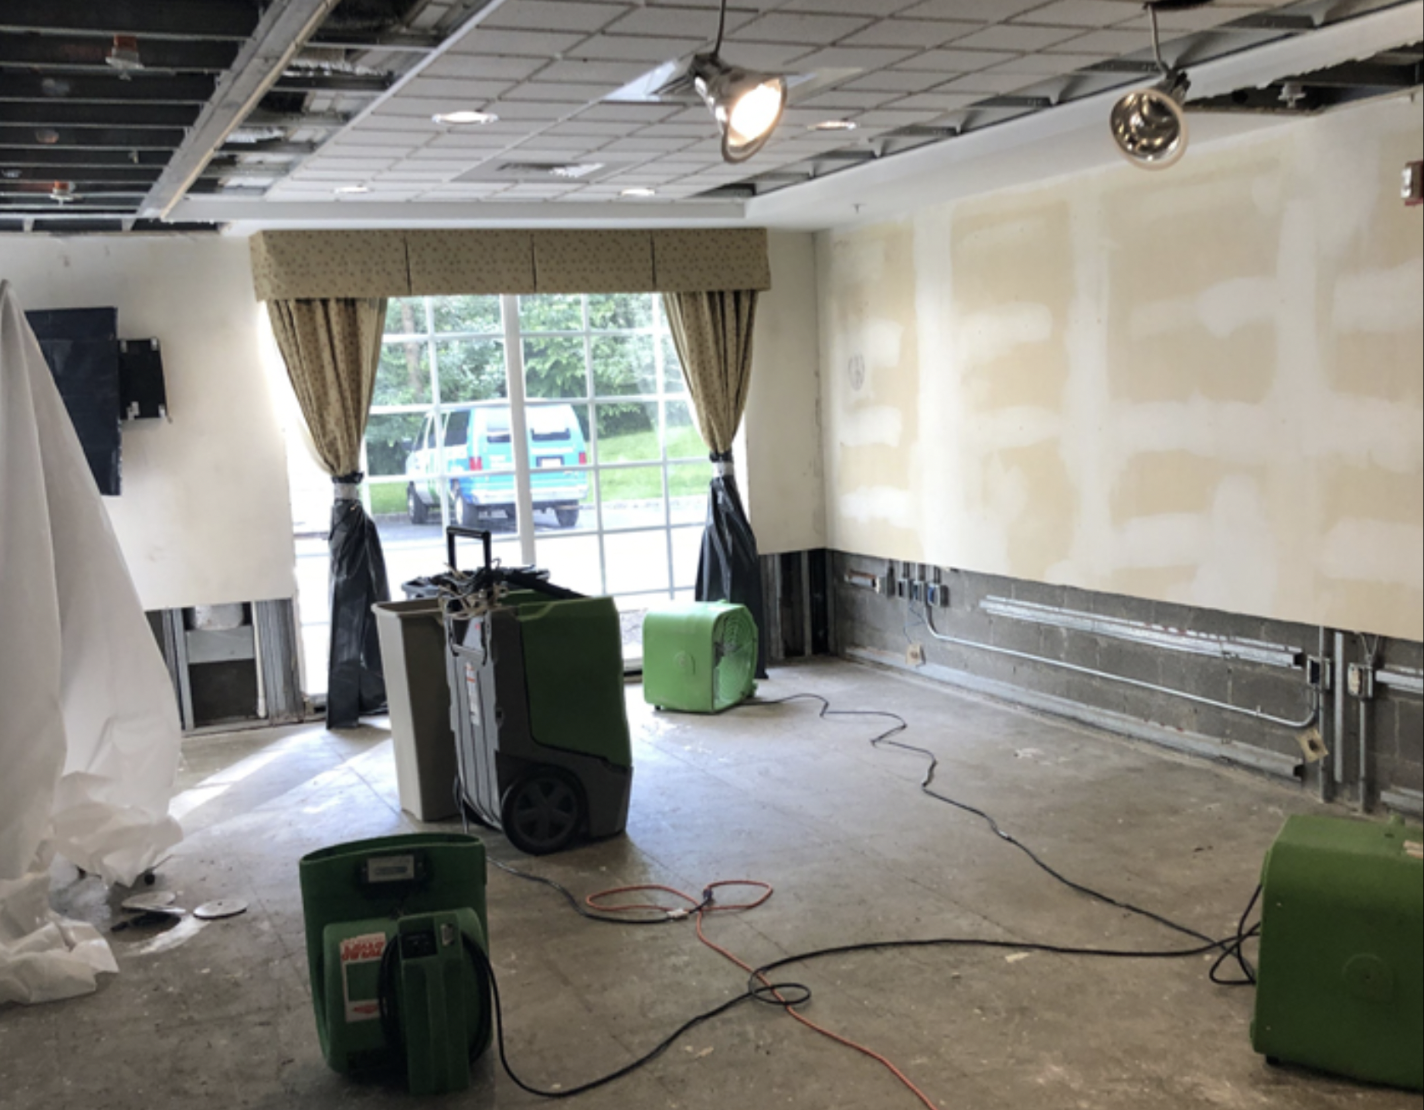 Water damage restoration equipment and recovery services by SERVPRO professionals, drying equipment and dehumidifiers to mitigate damages